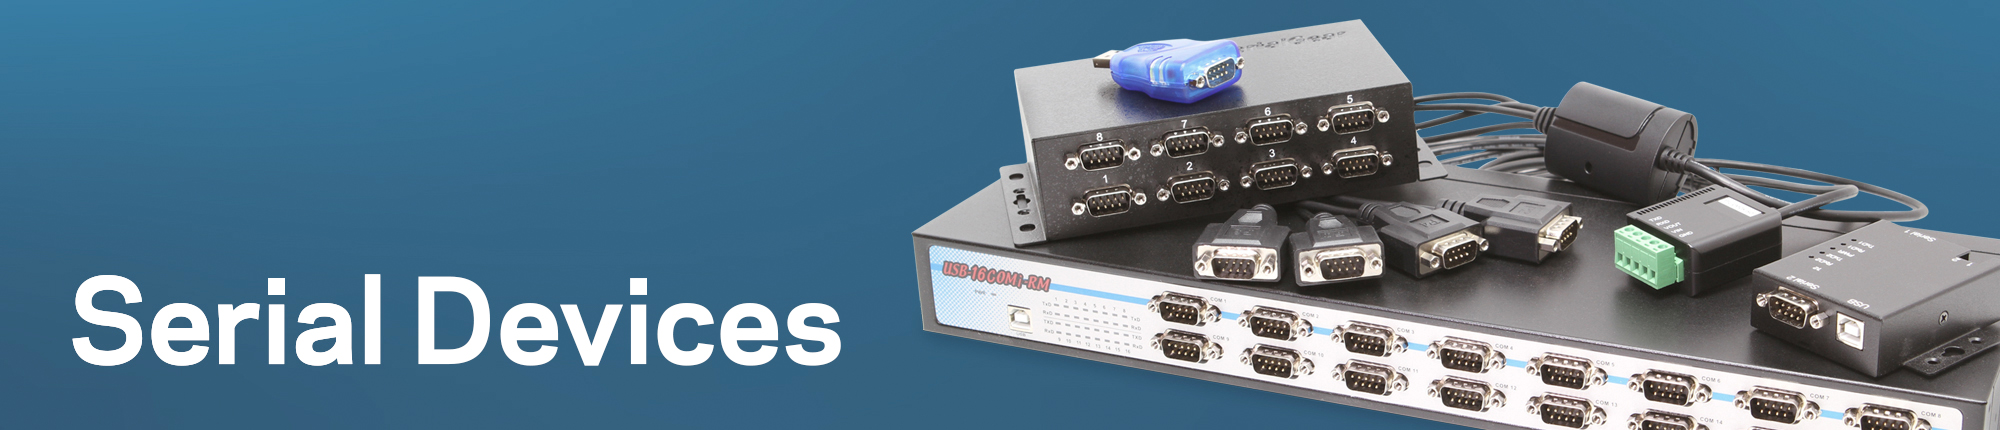 16 Port RS-232 Rack Mountable USB to Serial Adapter